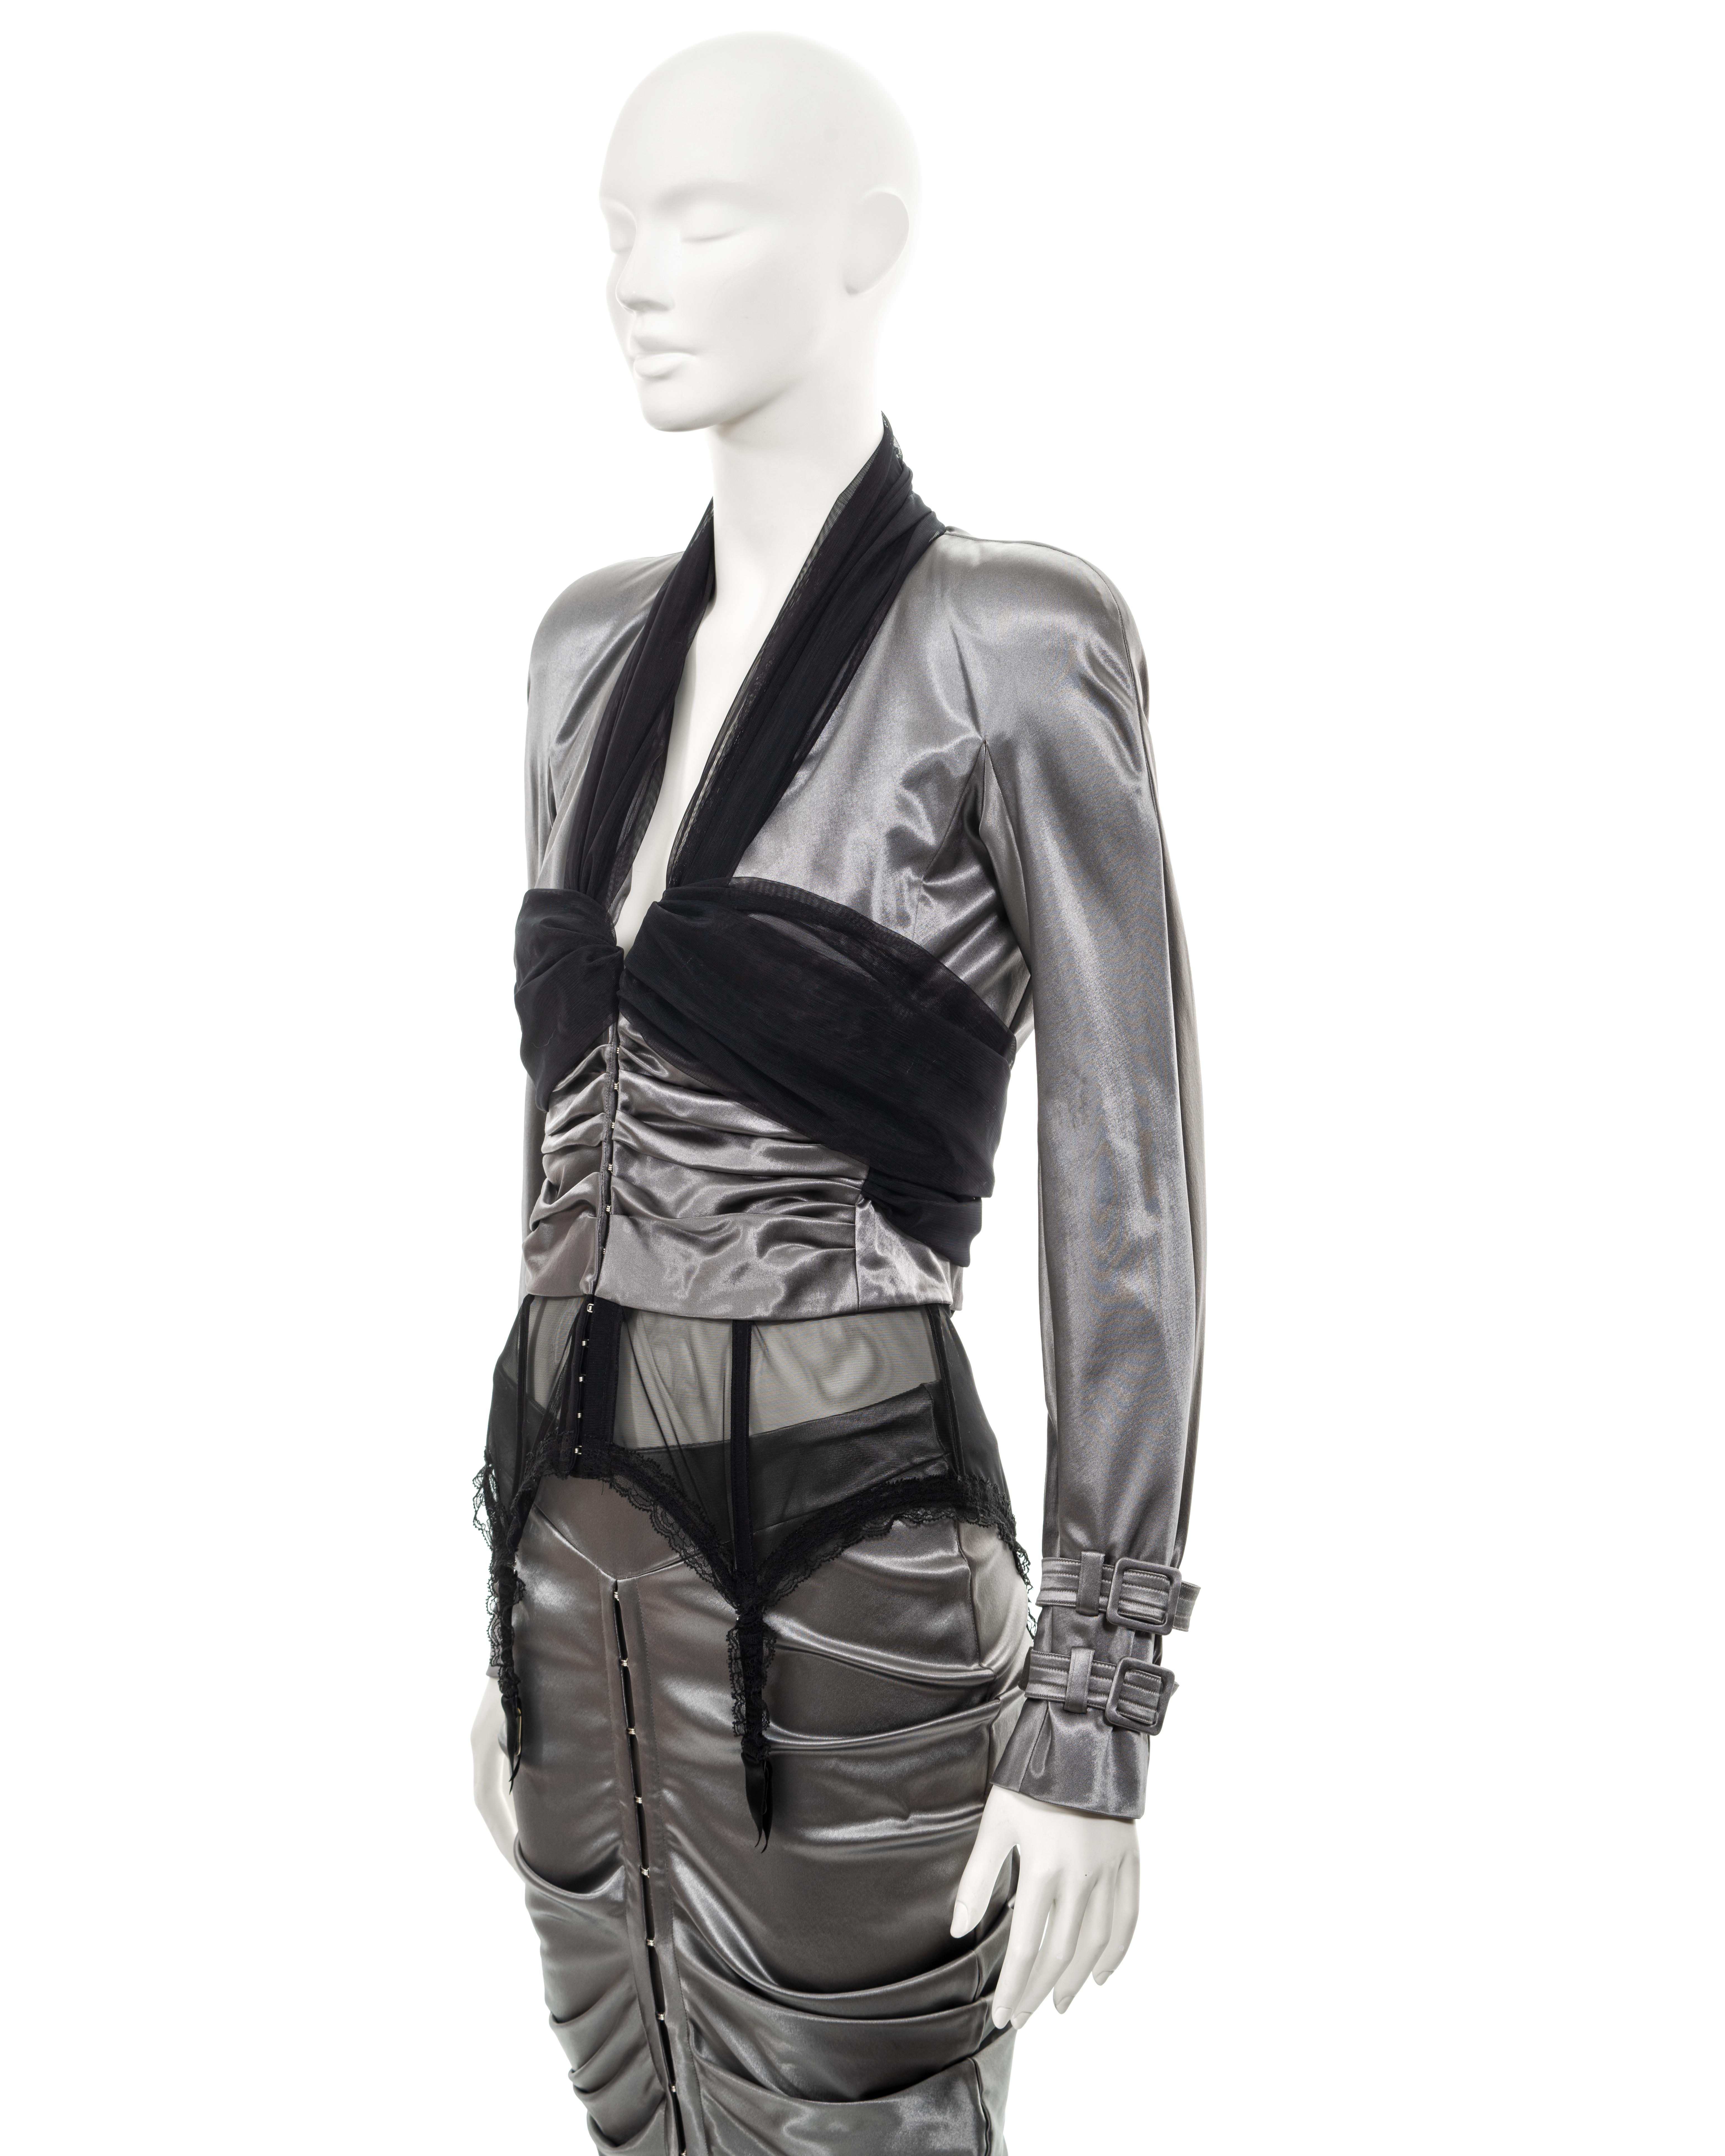 Christian Dior by John Galliano silver-grey stretch satin skirt suit, ss 2004 12